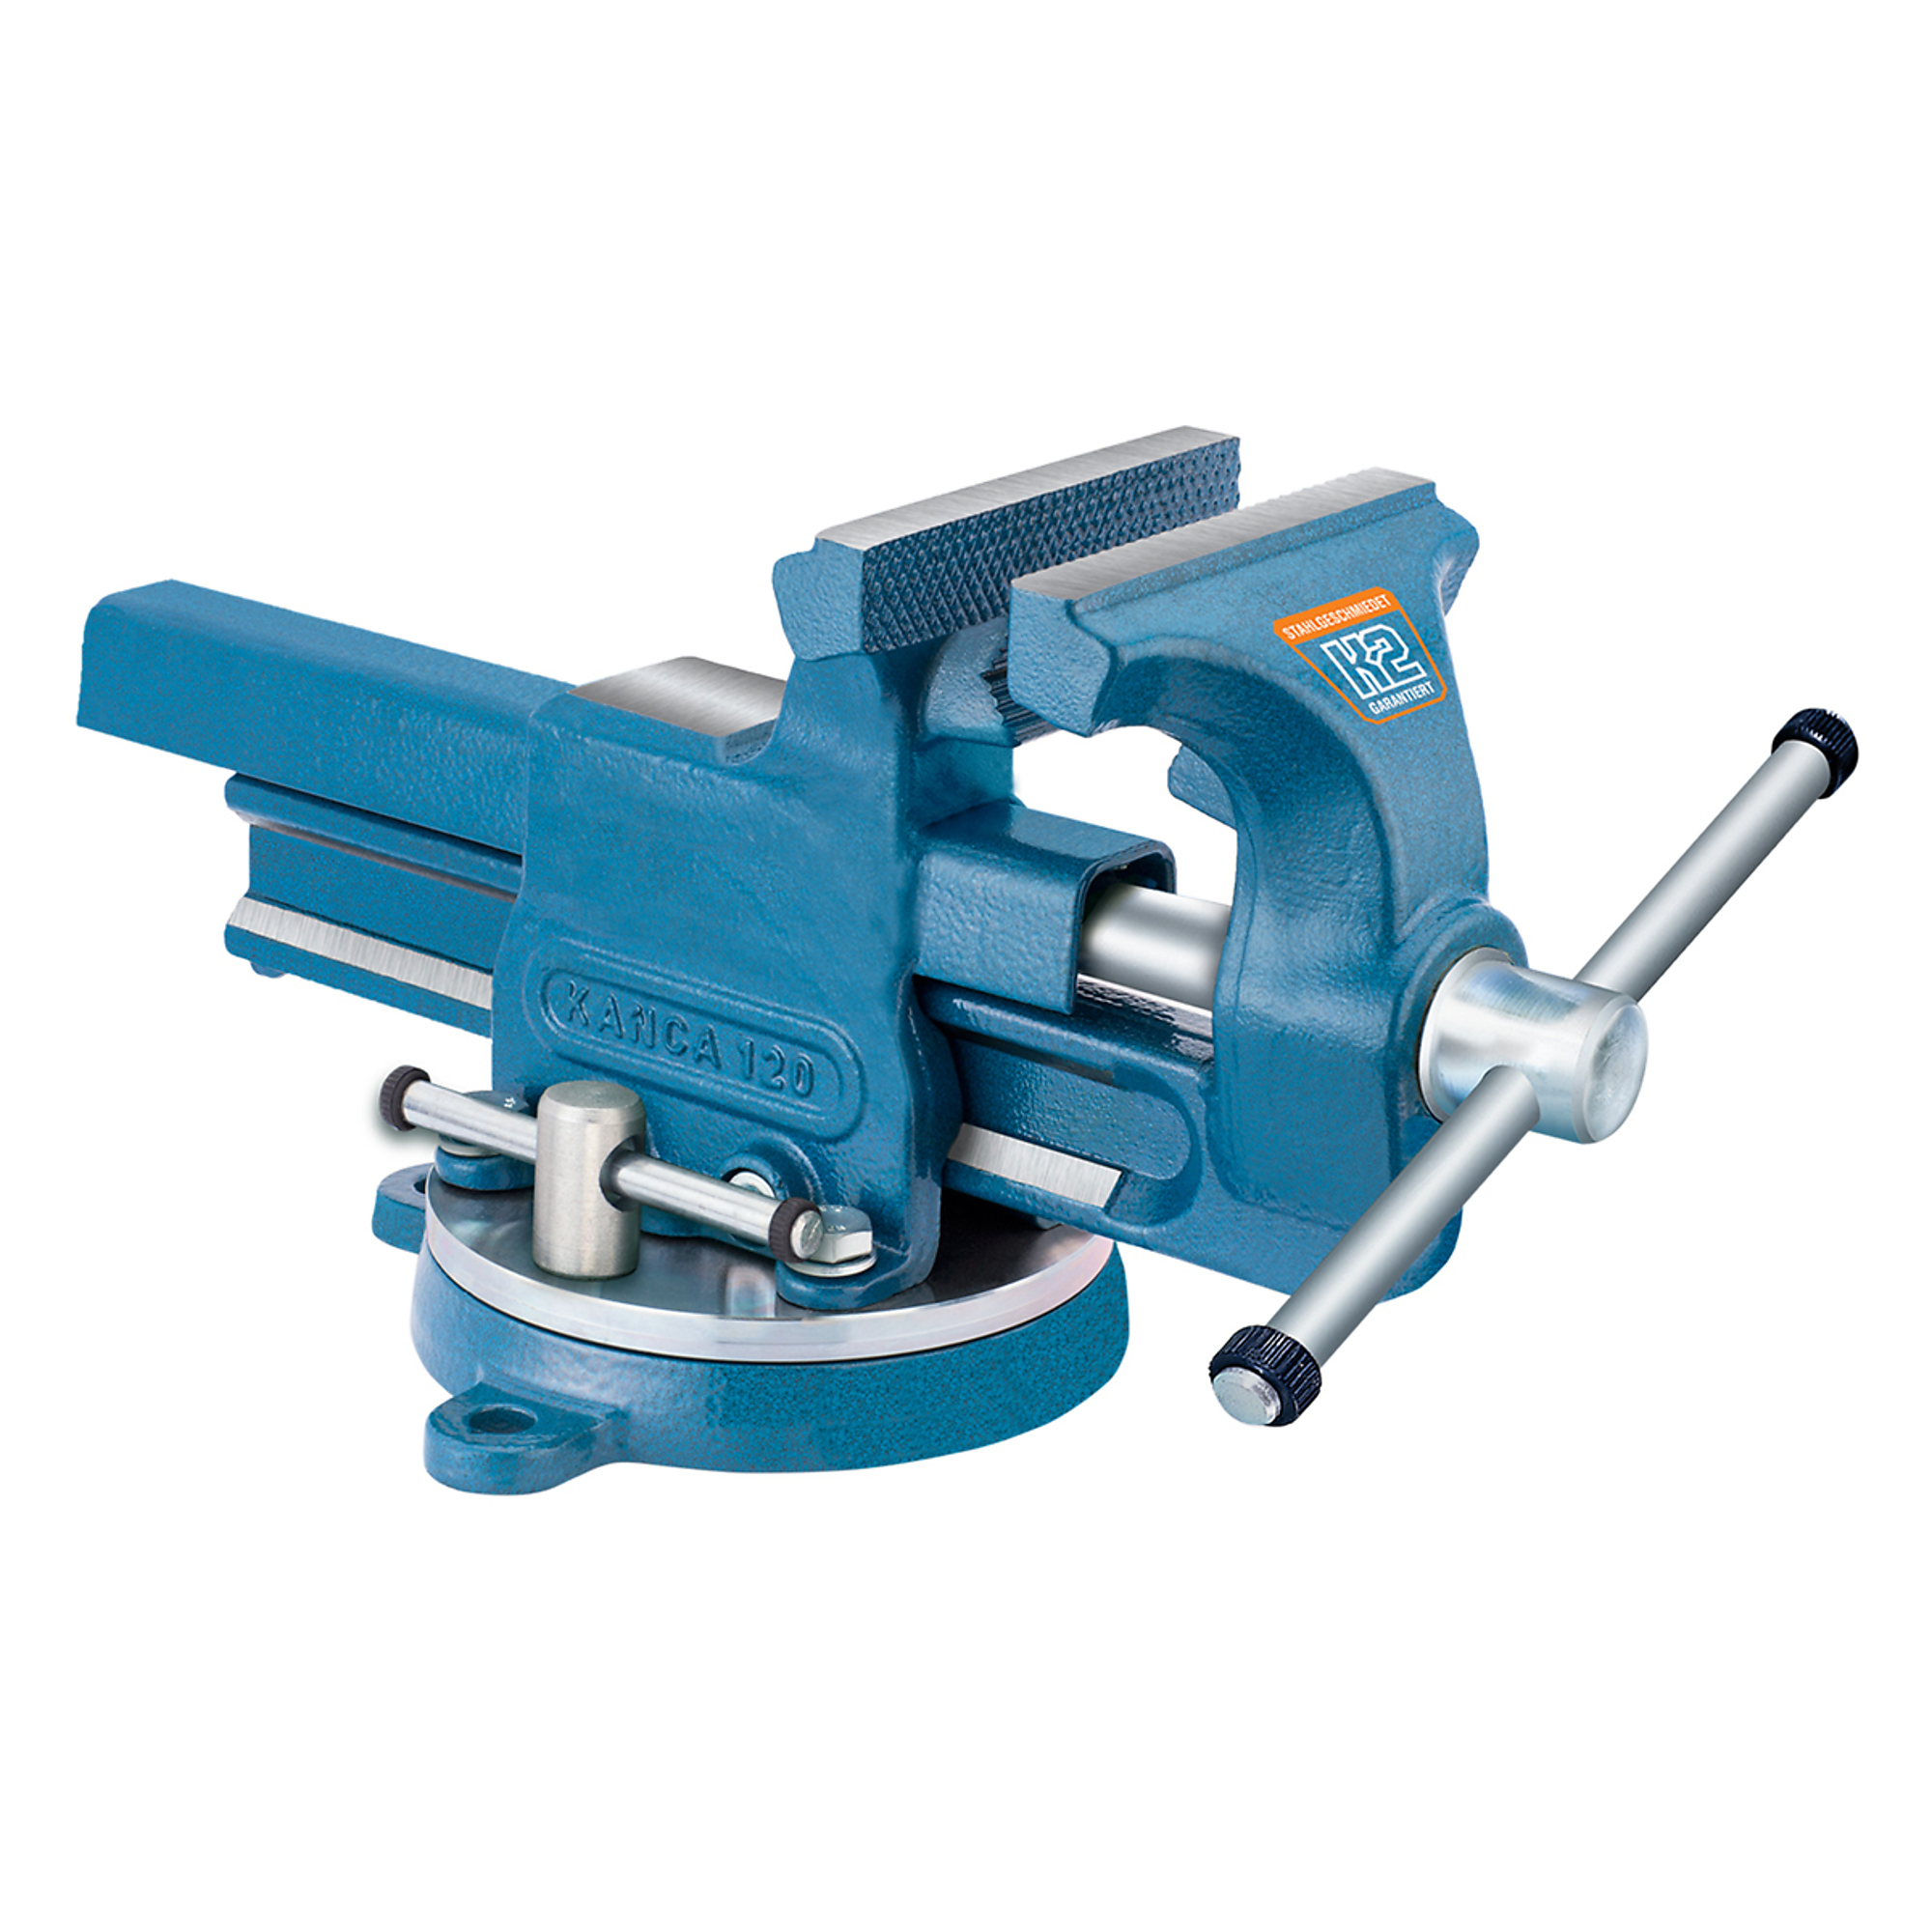 KANCA, K2 PLUMBERS VISE w. SWIVEL BASE 120 MM - 4.8Inch, Jaw Width 4.8 in, Jaw Capacity 4.5 in, Model K2 Pipe and Bench Vise